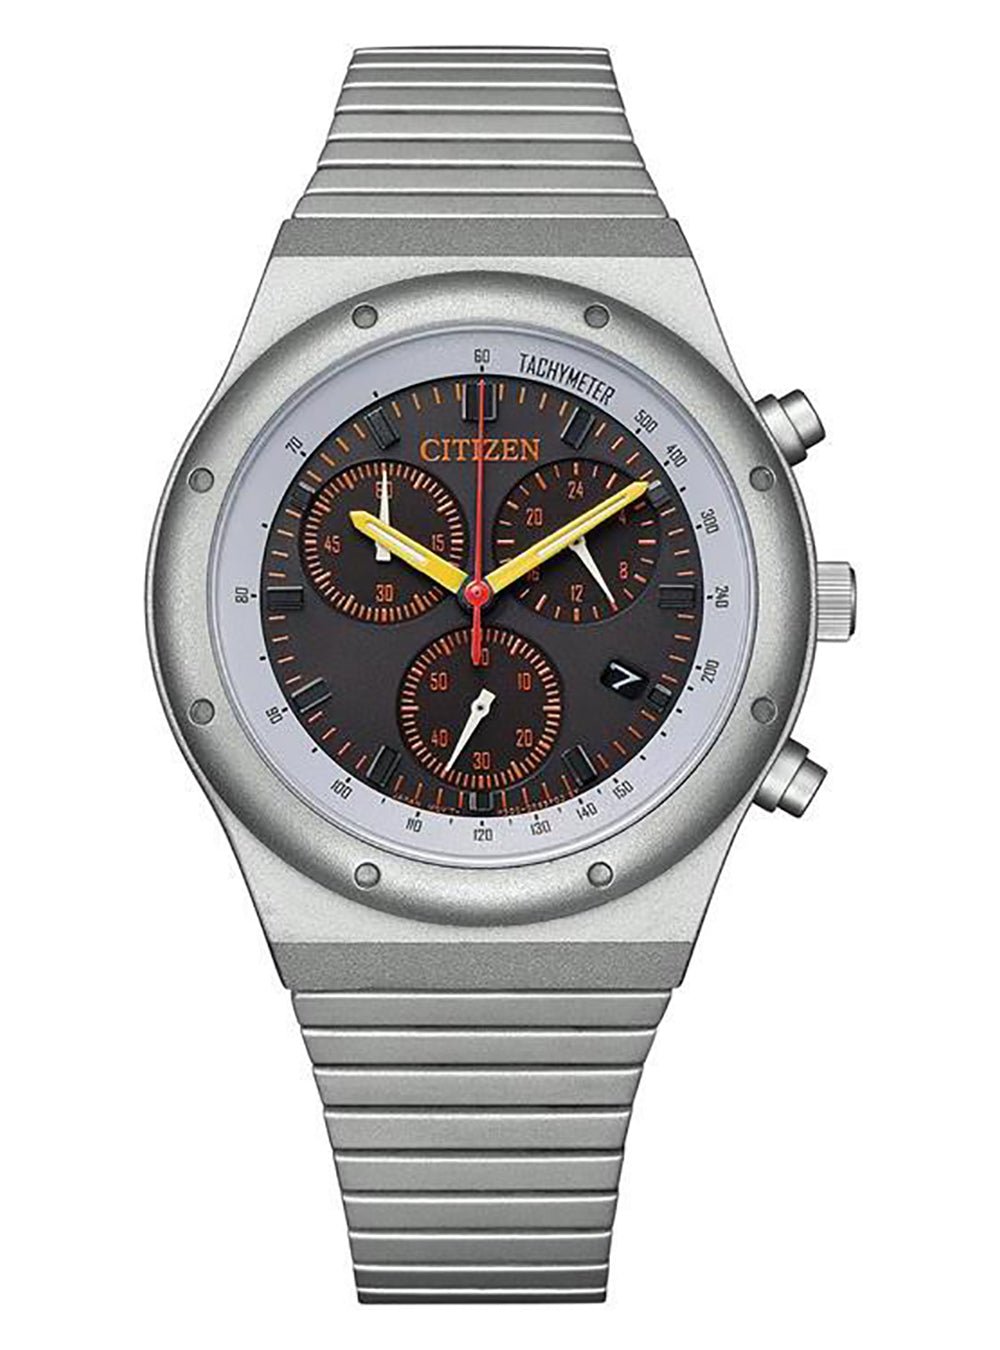 CITIZEN COLLECTION RECORD LABEL 1984 CHRONOGRAPH AT2557-54G ON-TIME MOVE  LIMITED EDITION JAPAN MOV'T JDM